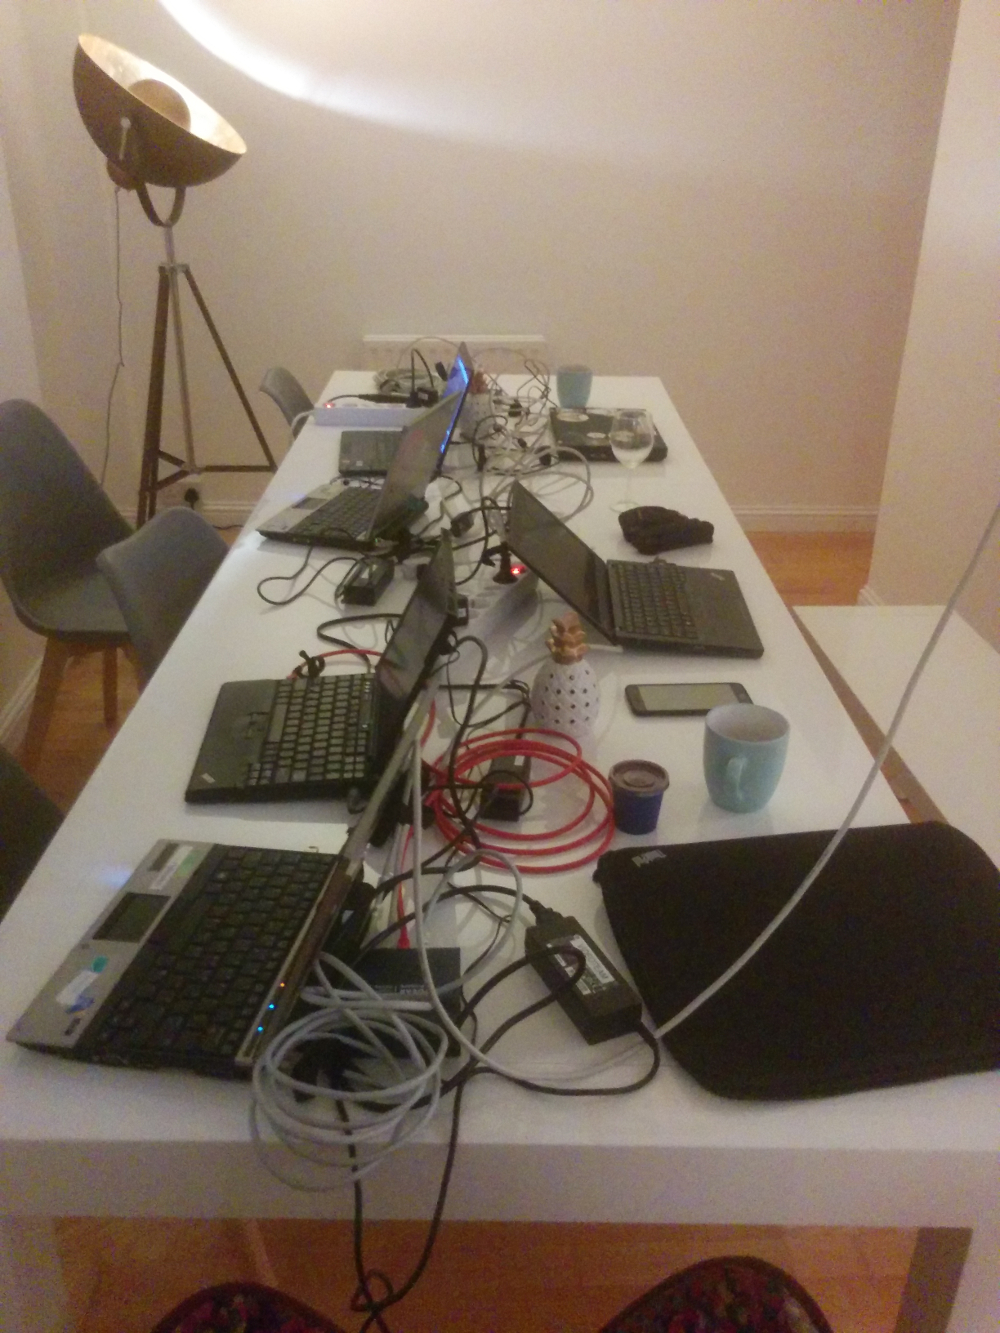 Our hacking space